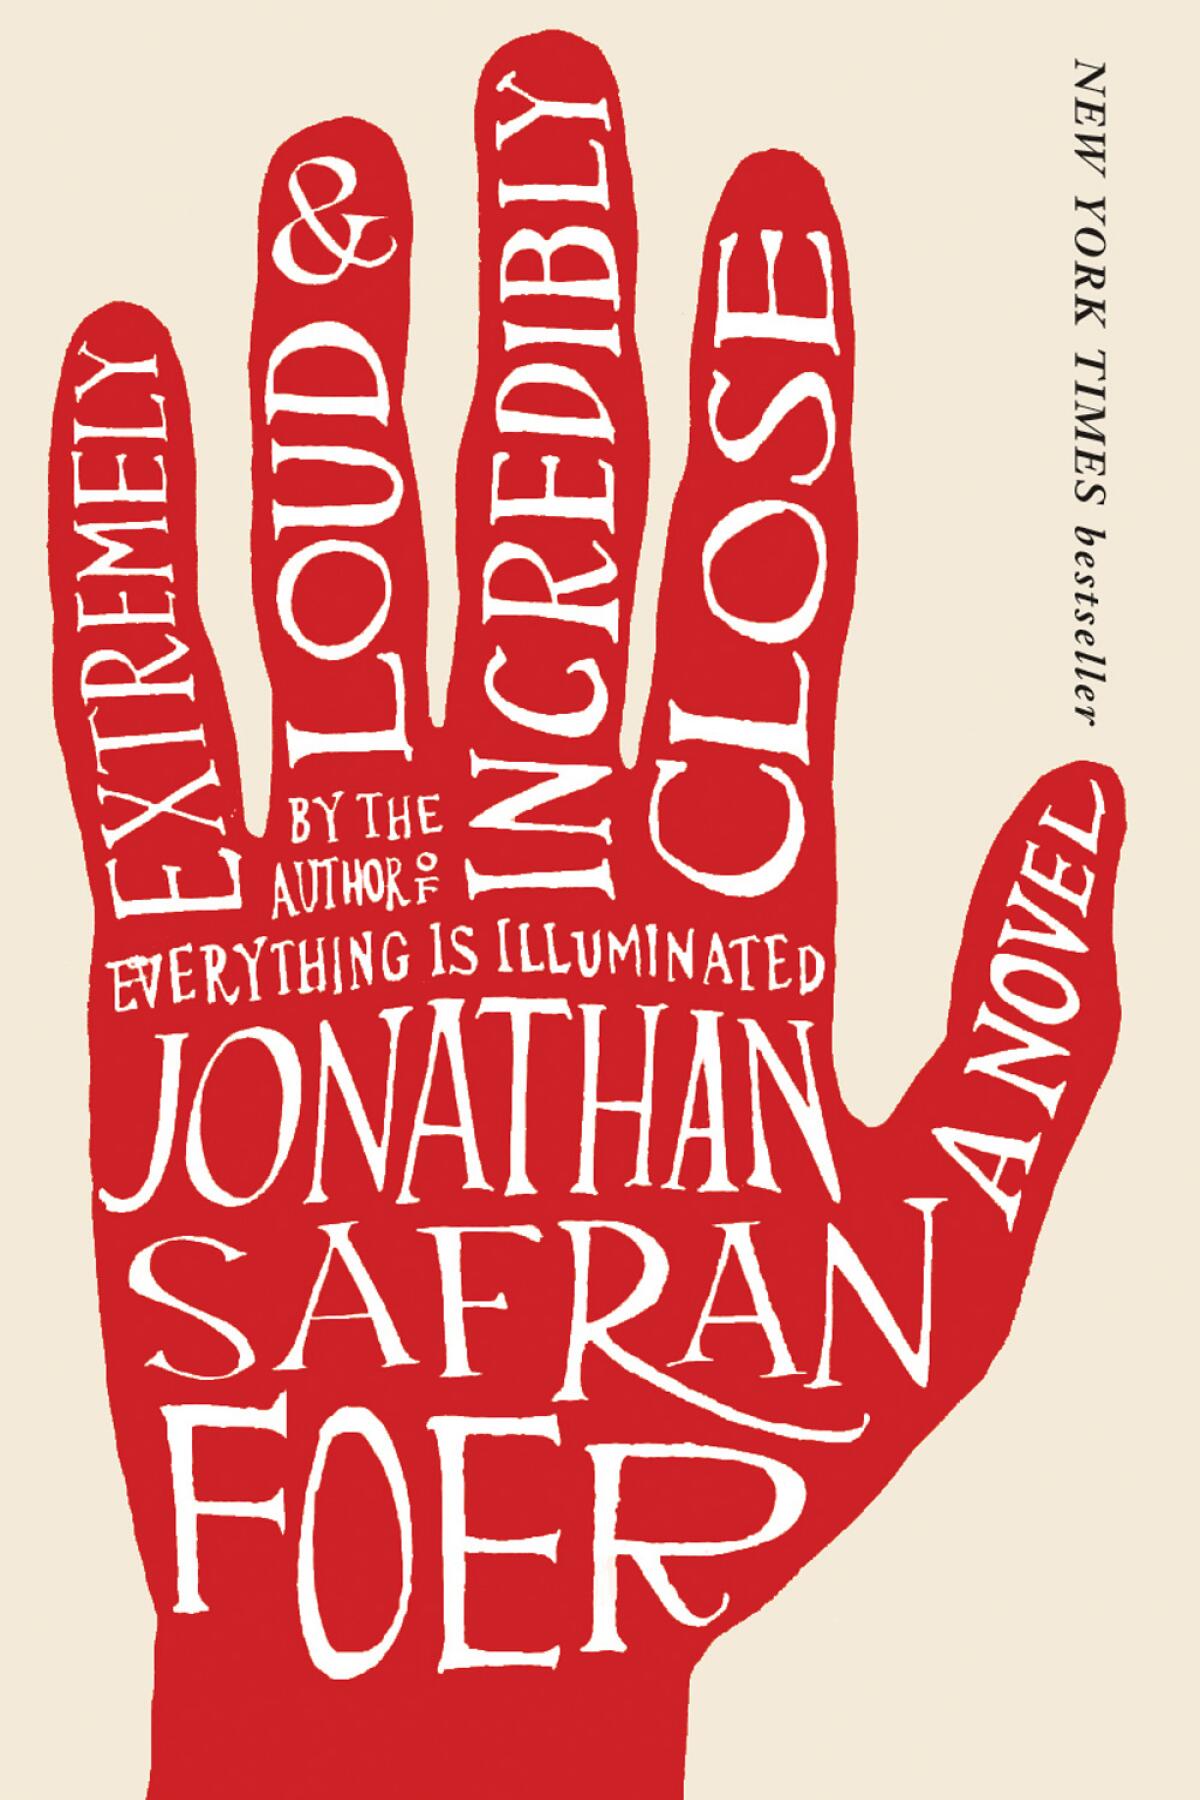 Book jacket for "Extremely Loud and Incredibly Close" by Jonathan Safran Foer